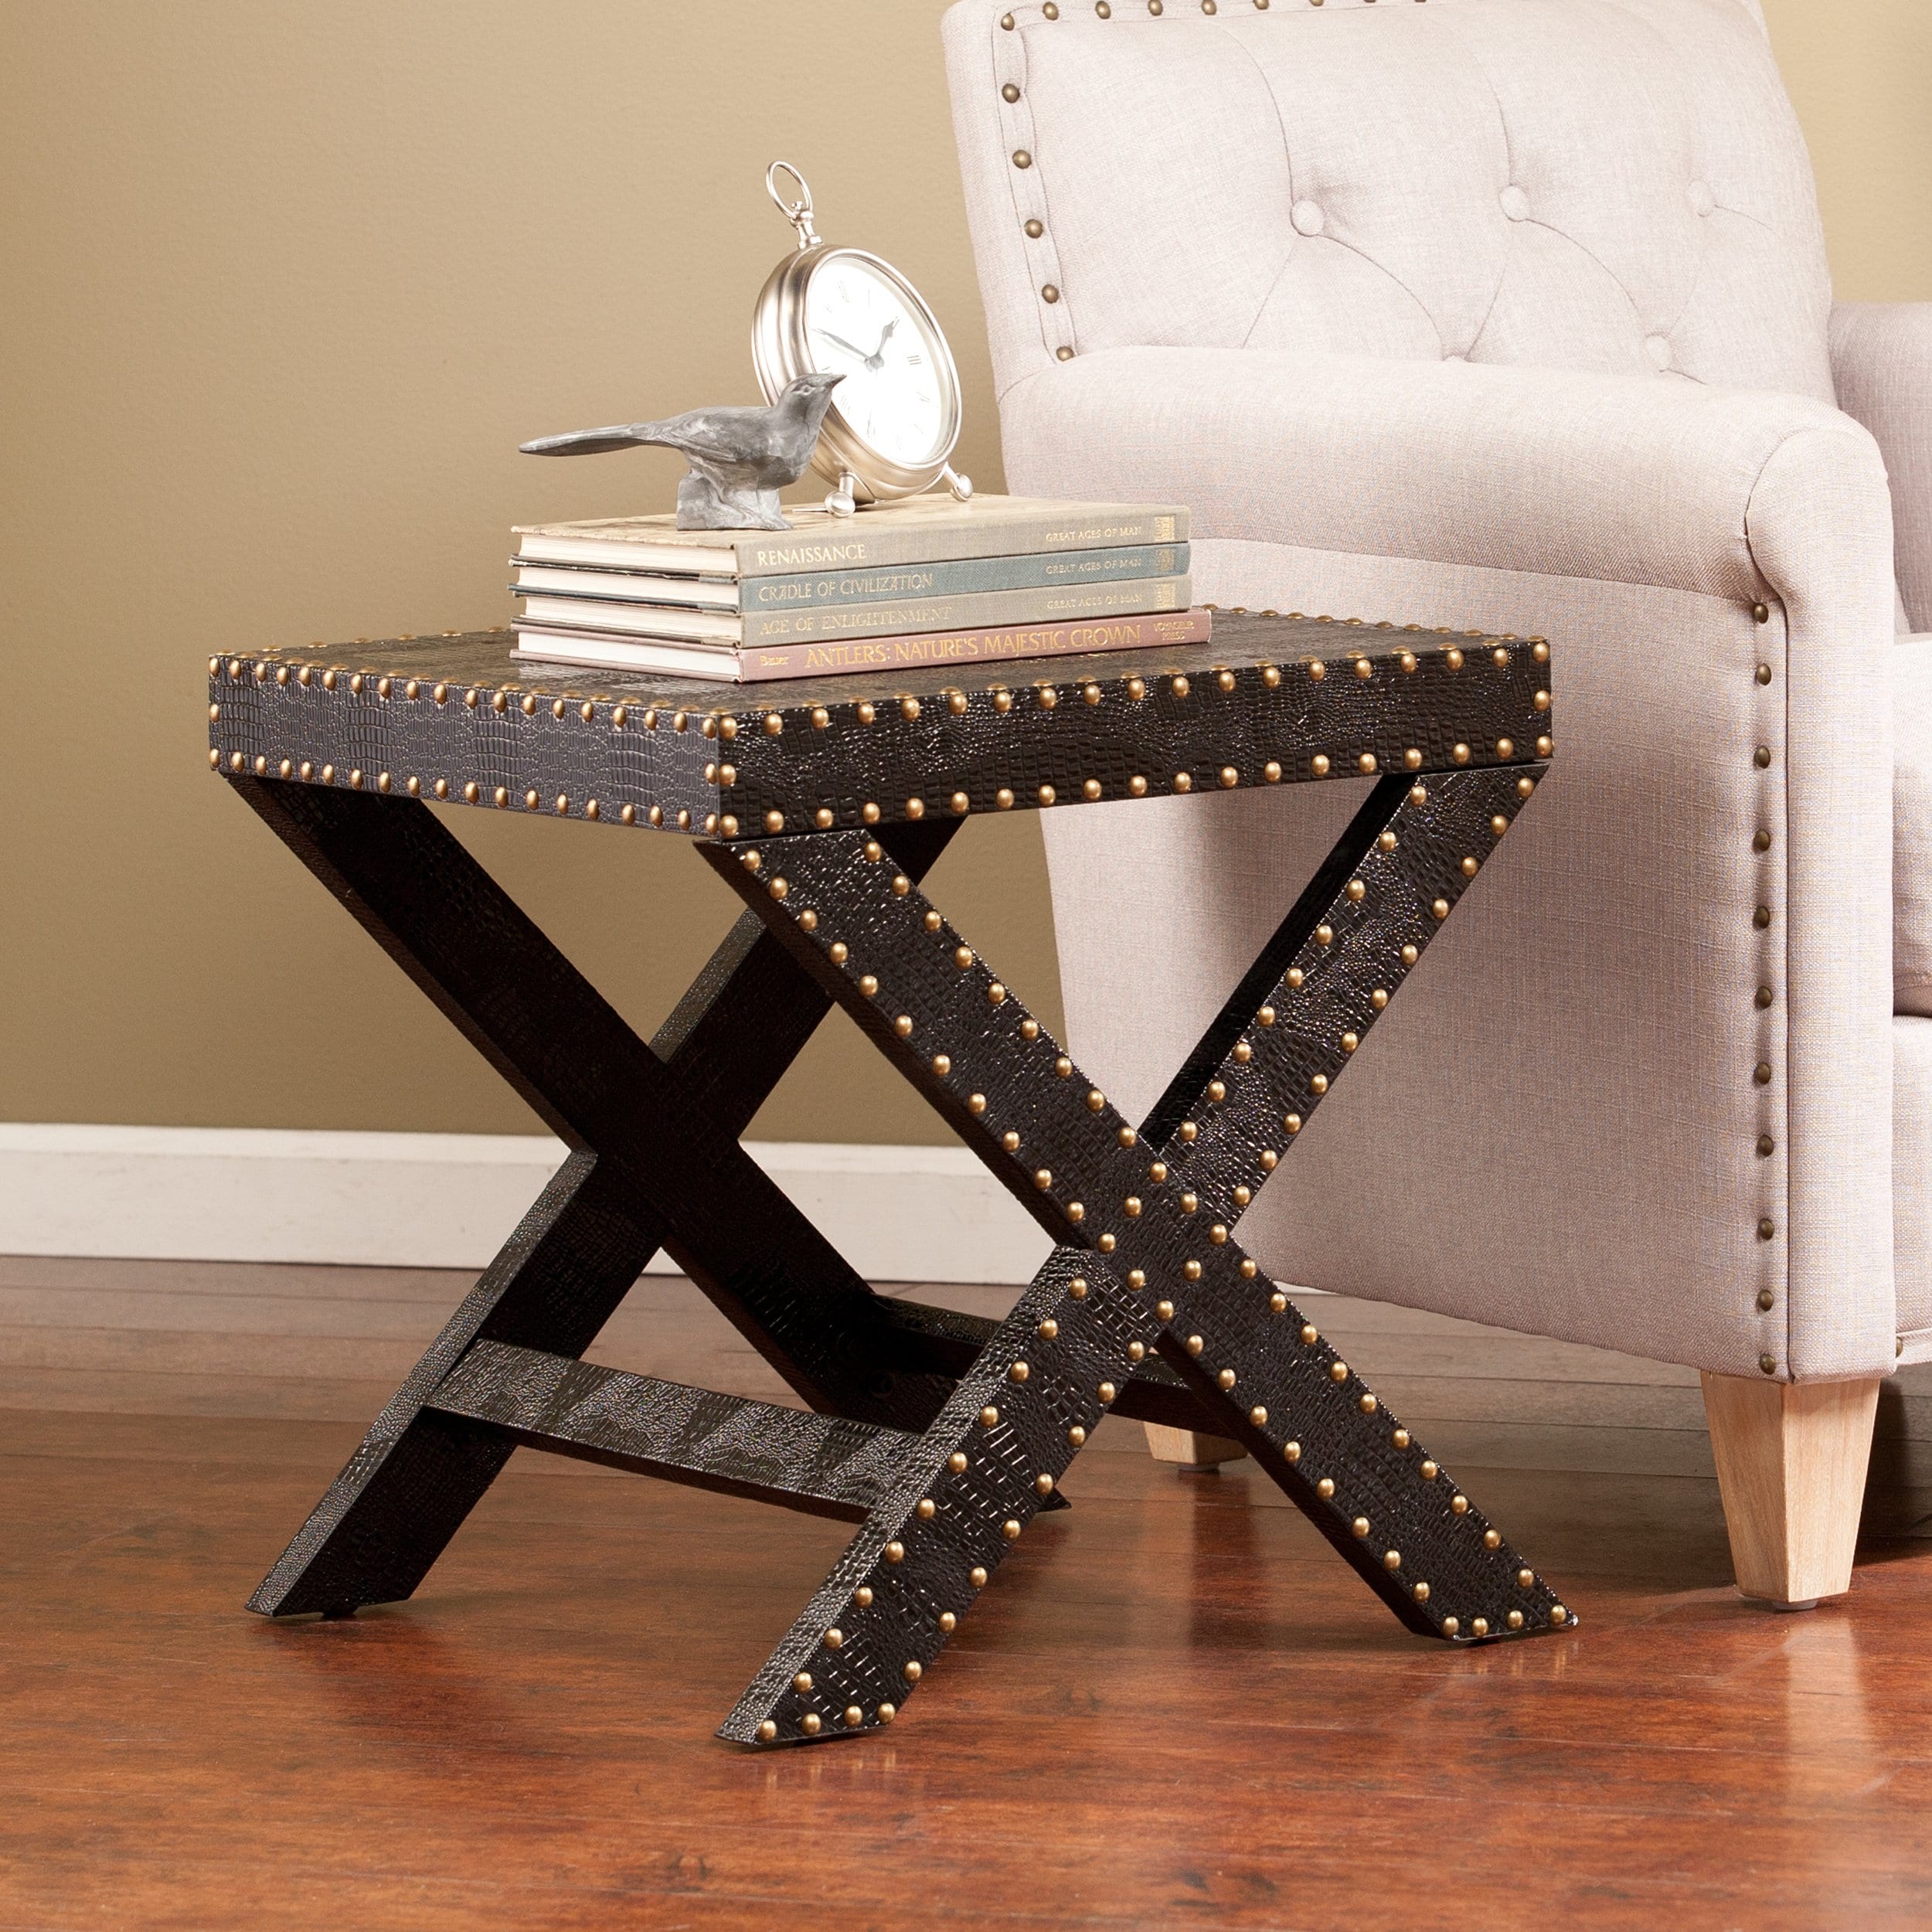 harper blvd black reptilian nailhead accent table free shipping upton home with nailheads today square metal end bistro set mirrored bedside lamps uma console day island county